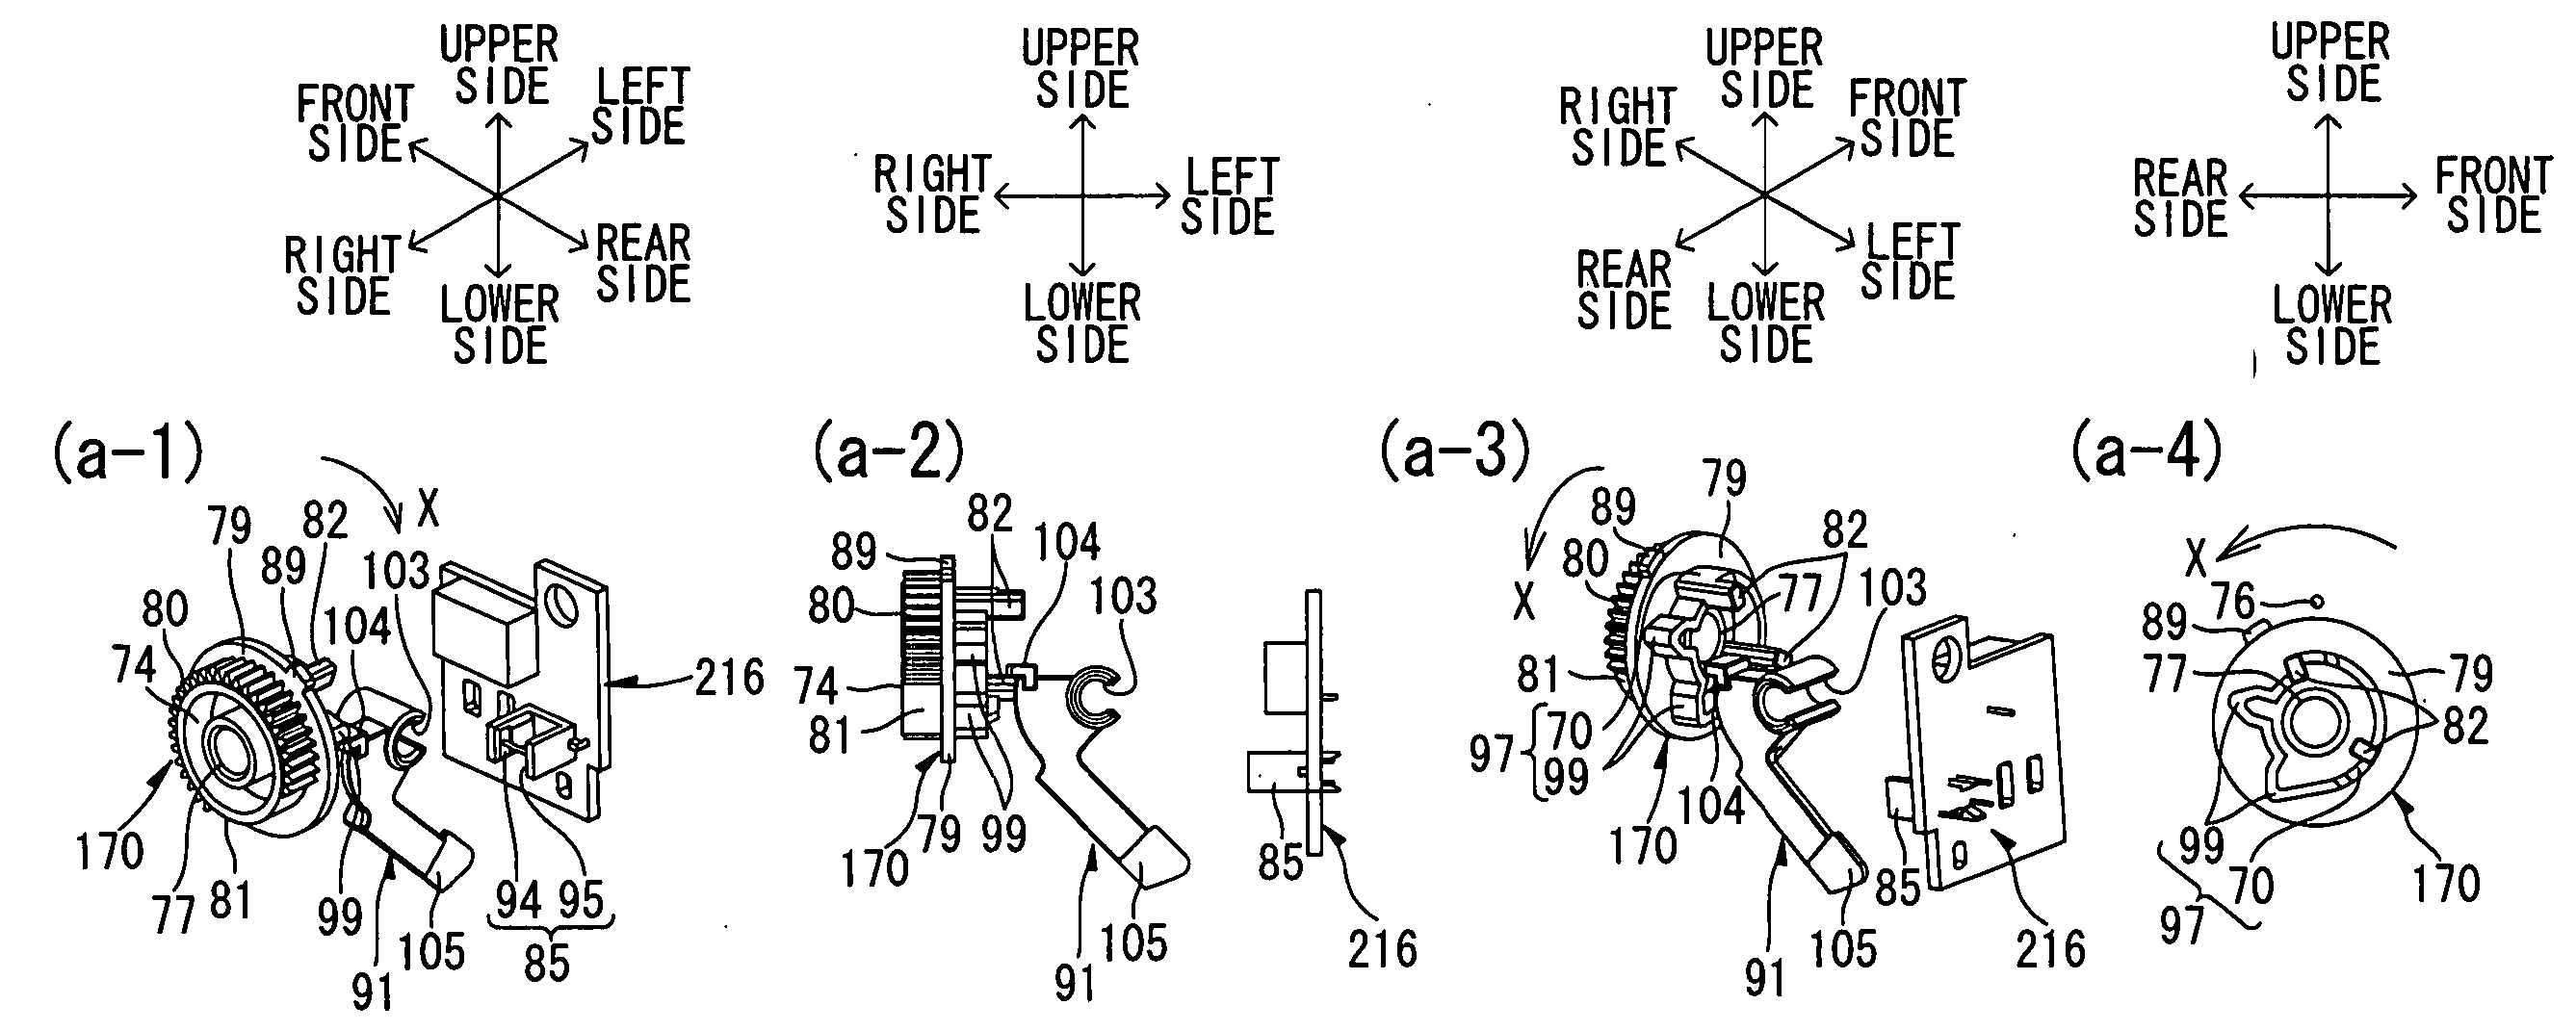 Image forming apparatus, image forming unit and developer cartridge